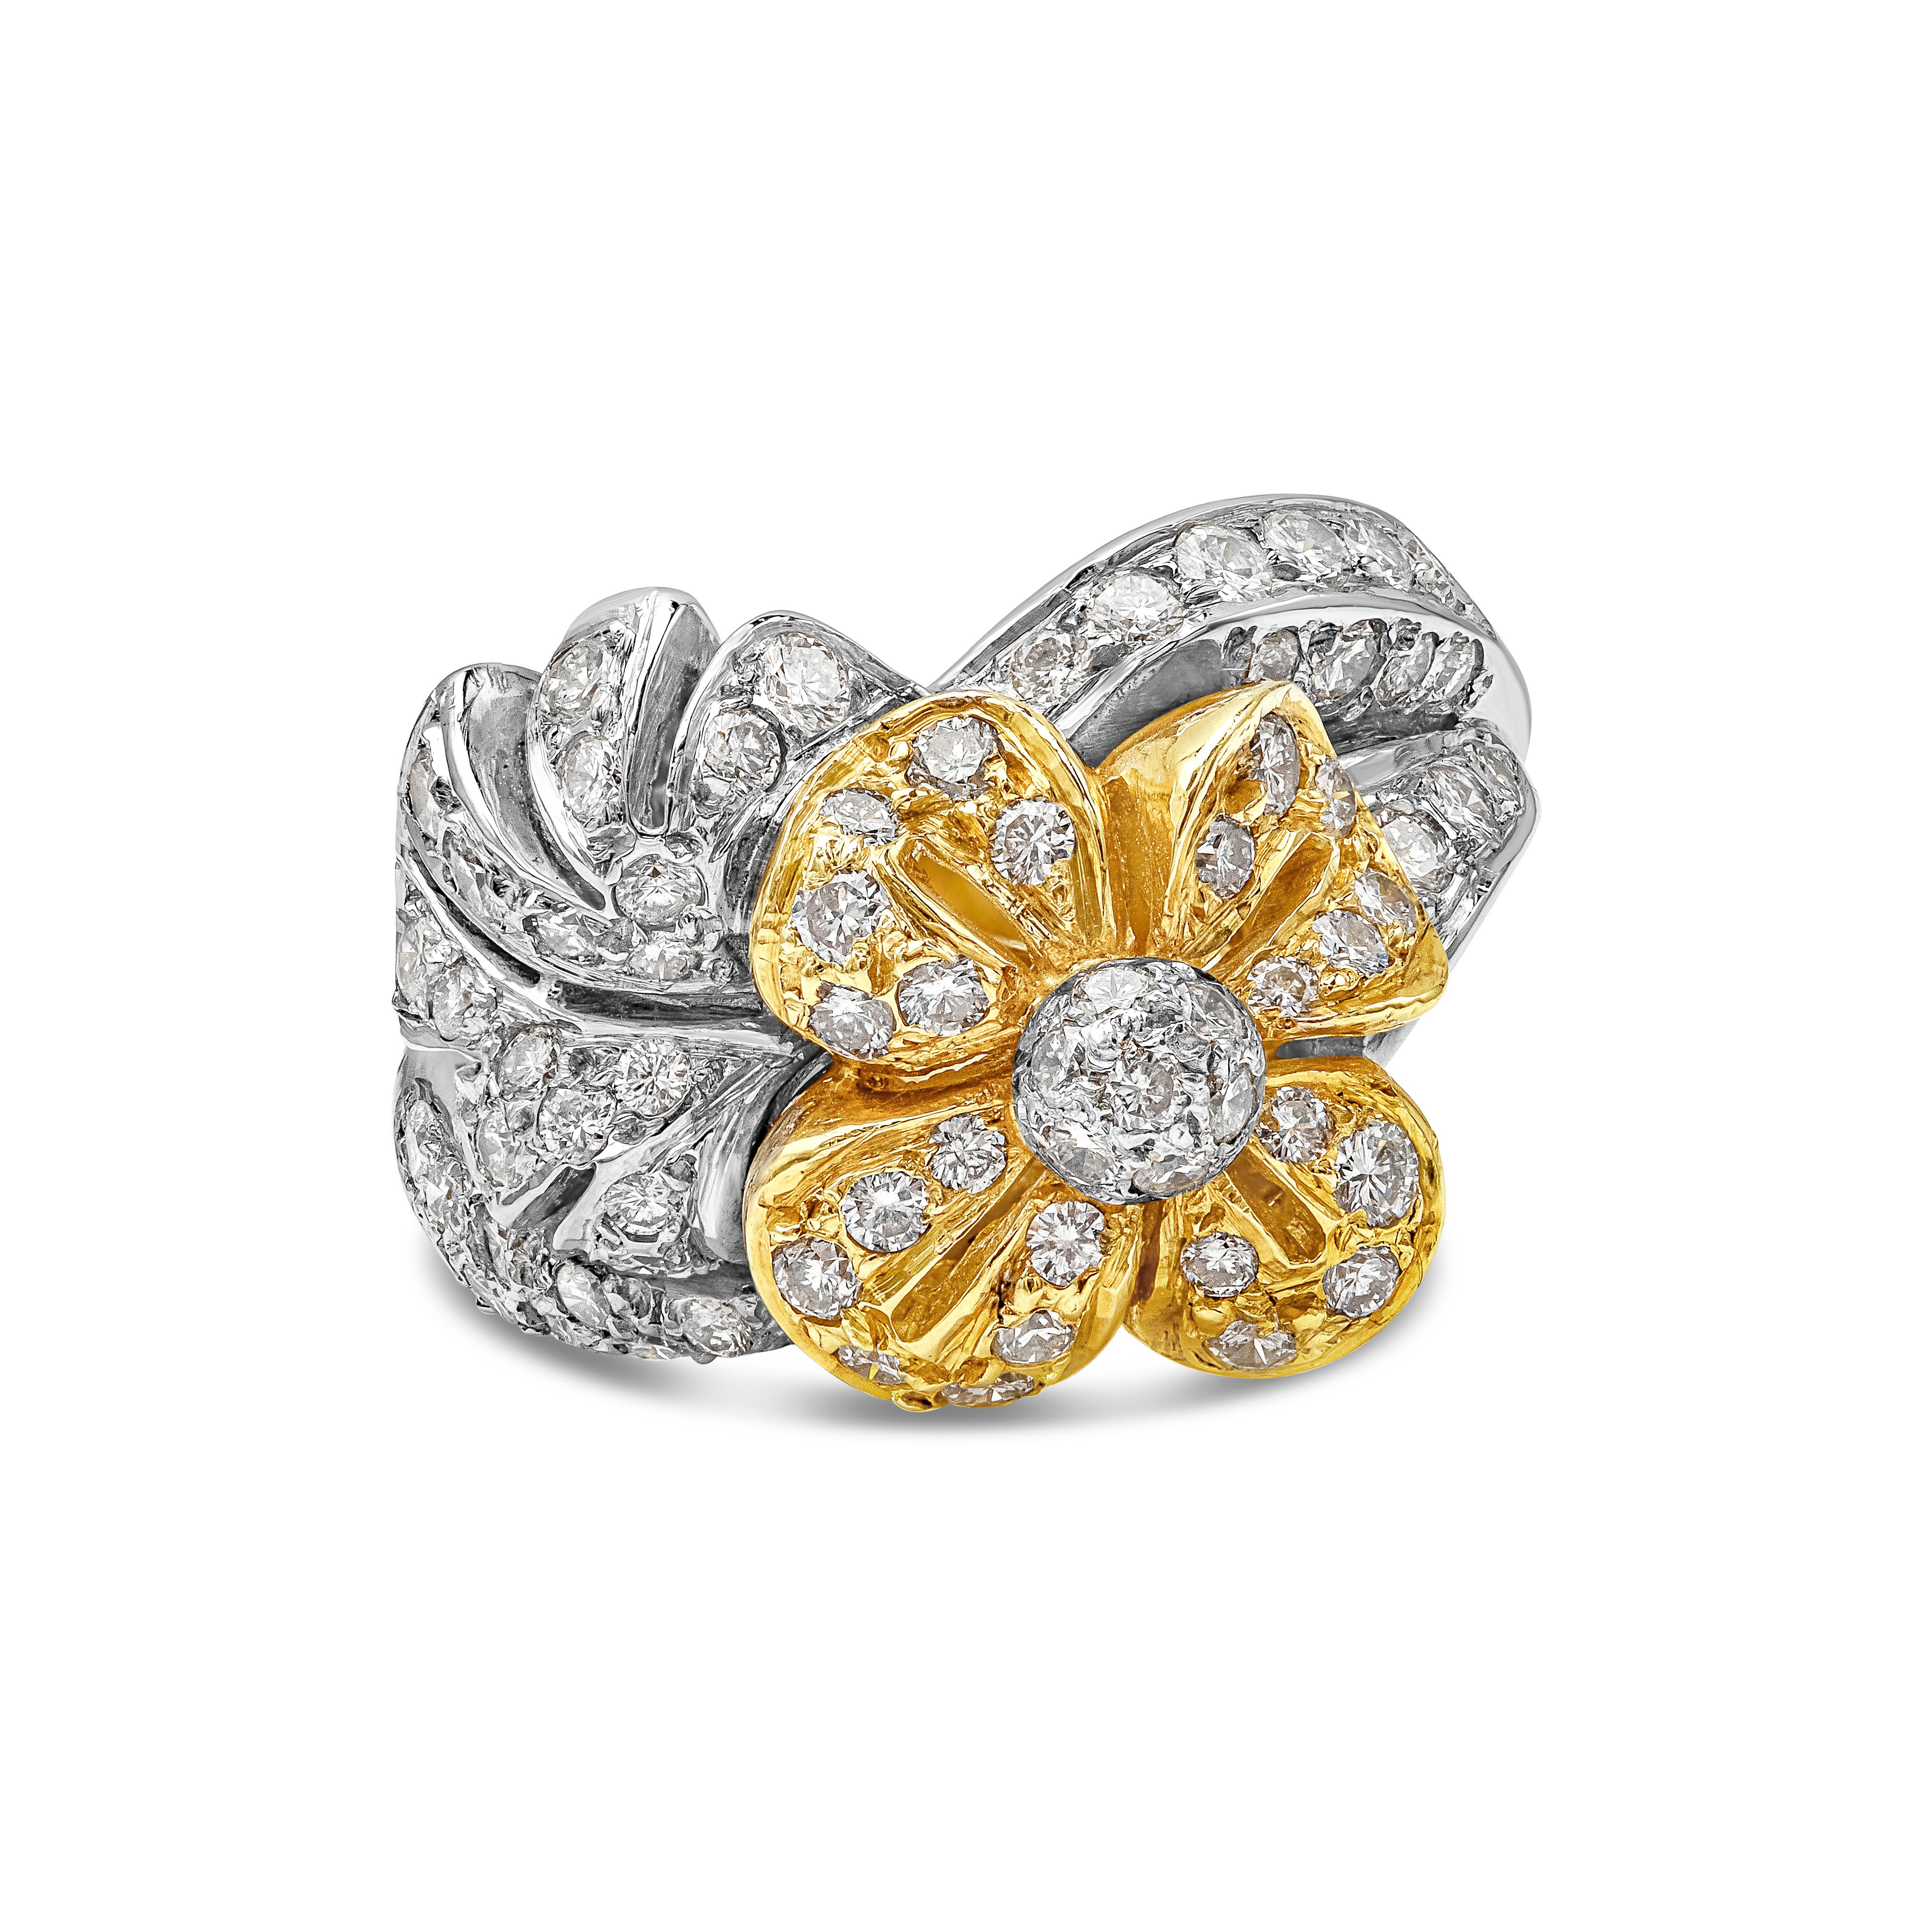 A fashionable ring, showcasing a beautiful floral-motif design with 72 round brilliant cut diamonds weighing 1.09 carats total. Finely set in 18K white and yellow gold. Size 7 US, resizable upon request. 
